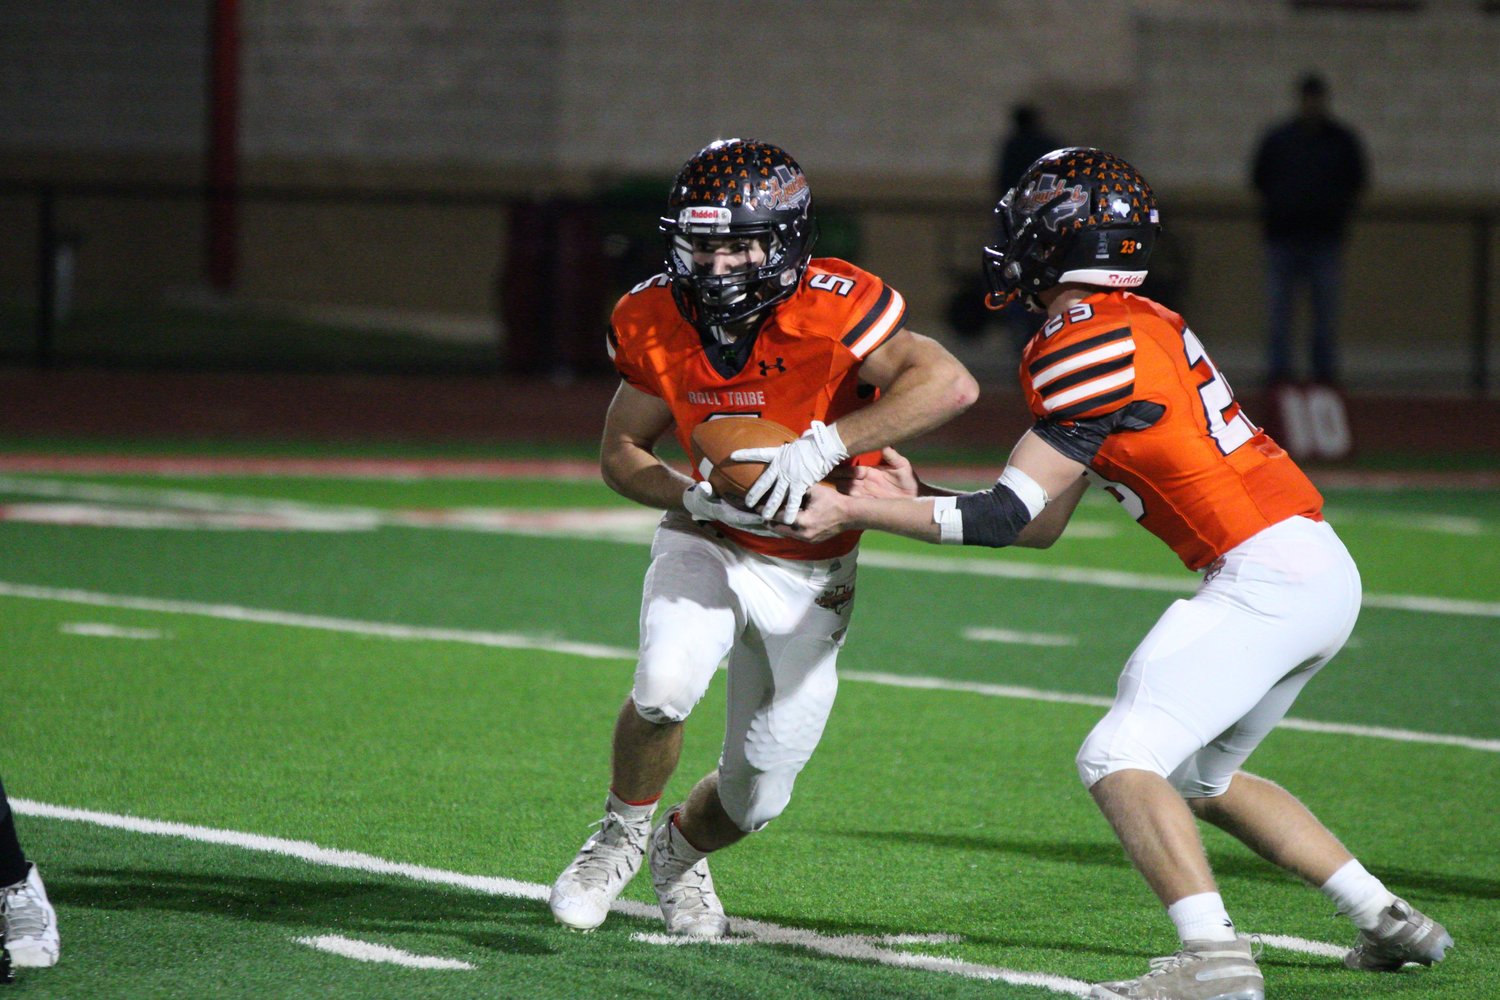 Seth Gibson (5) had four touchdowns and nearly 200 yards rushing in Gonzales' 35-15 victory over Kingsville in the bi-district round.